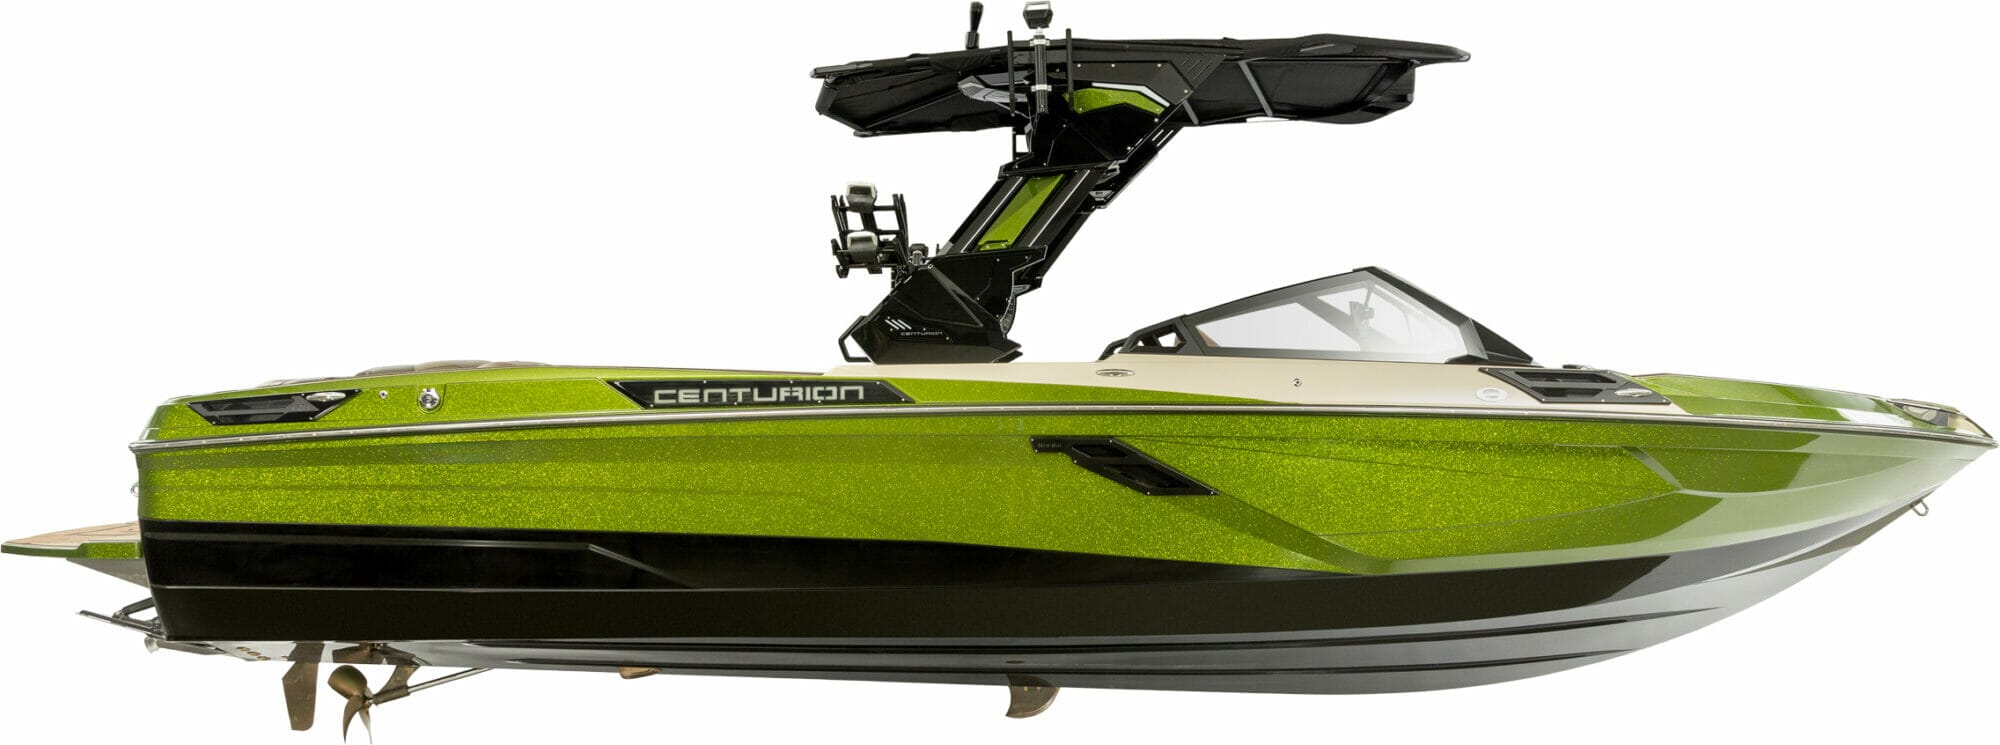 A green wakesurf boat with a motor attached to it.